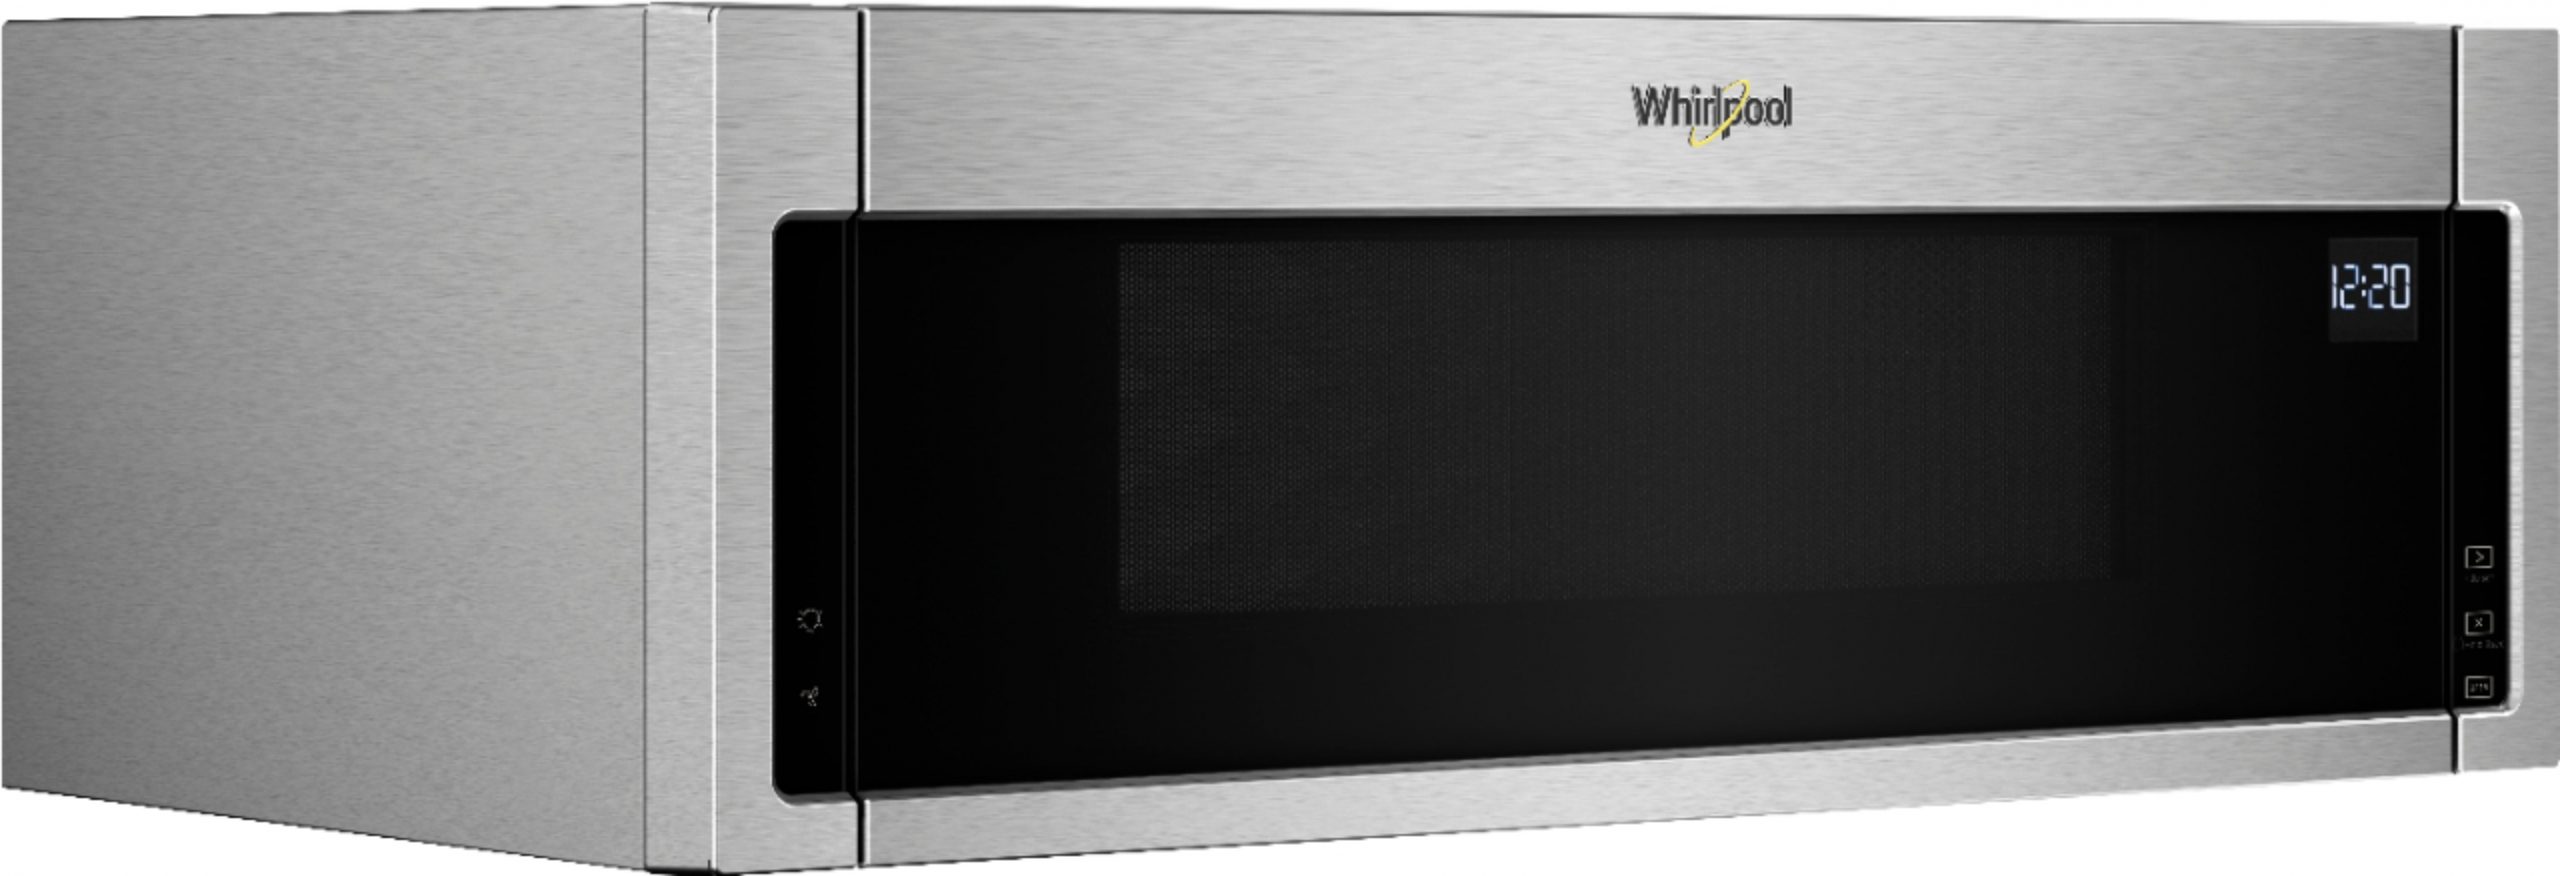 Whirlpool 11 Cu Ft Low Profile Over The Range Microwave Hood Combination Stainless Steel intended for measurements 5634 X 1927